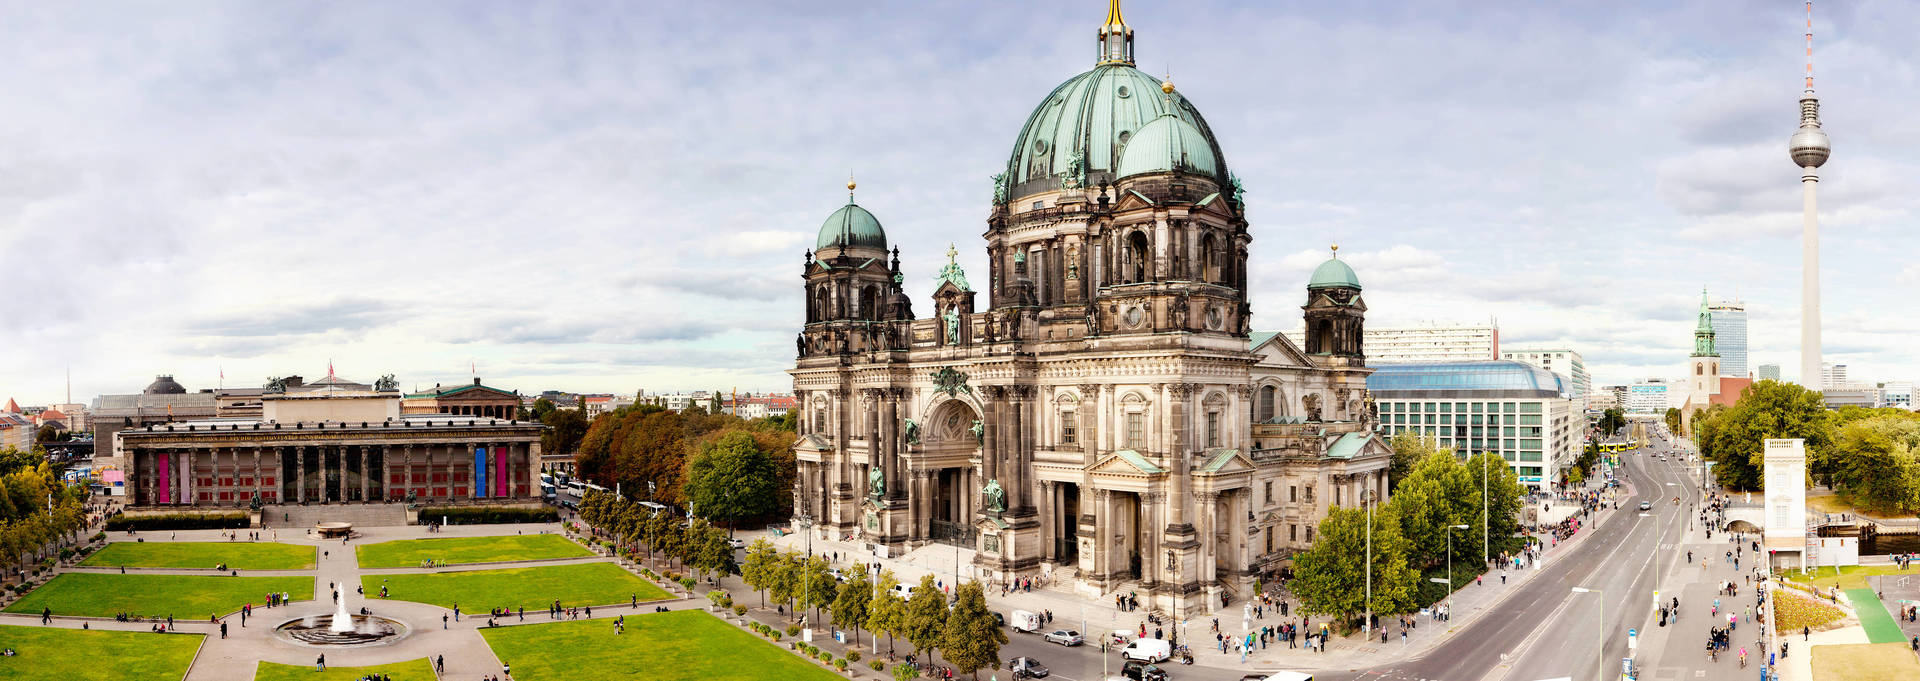 Redeem your travel voucher and discover Berlin - h-hotels.com - Official website